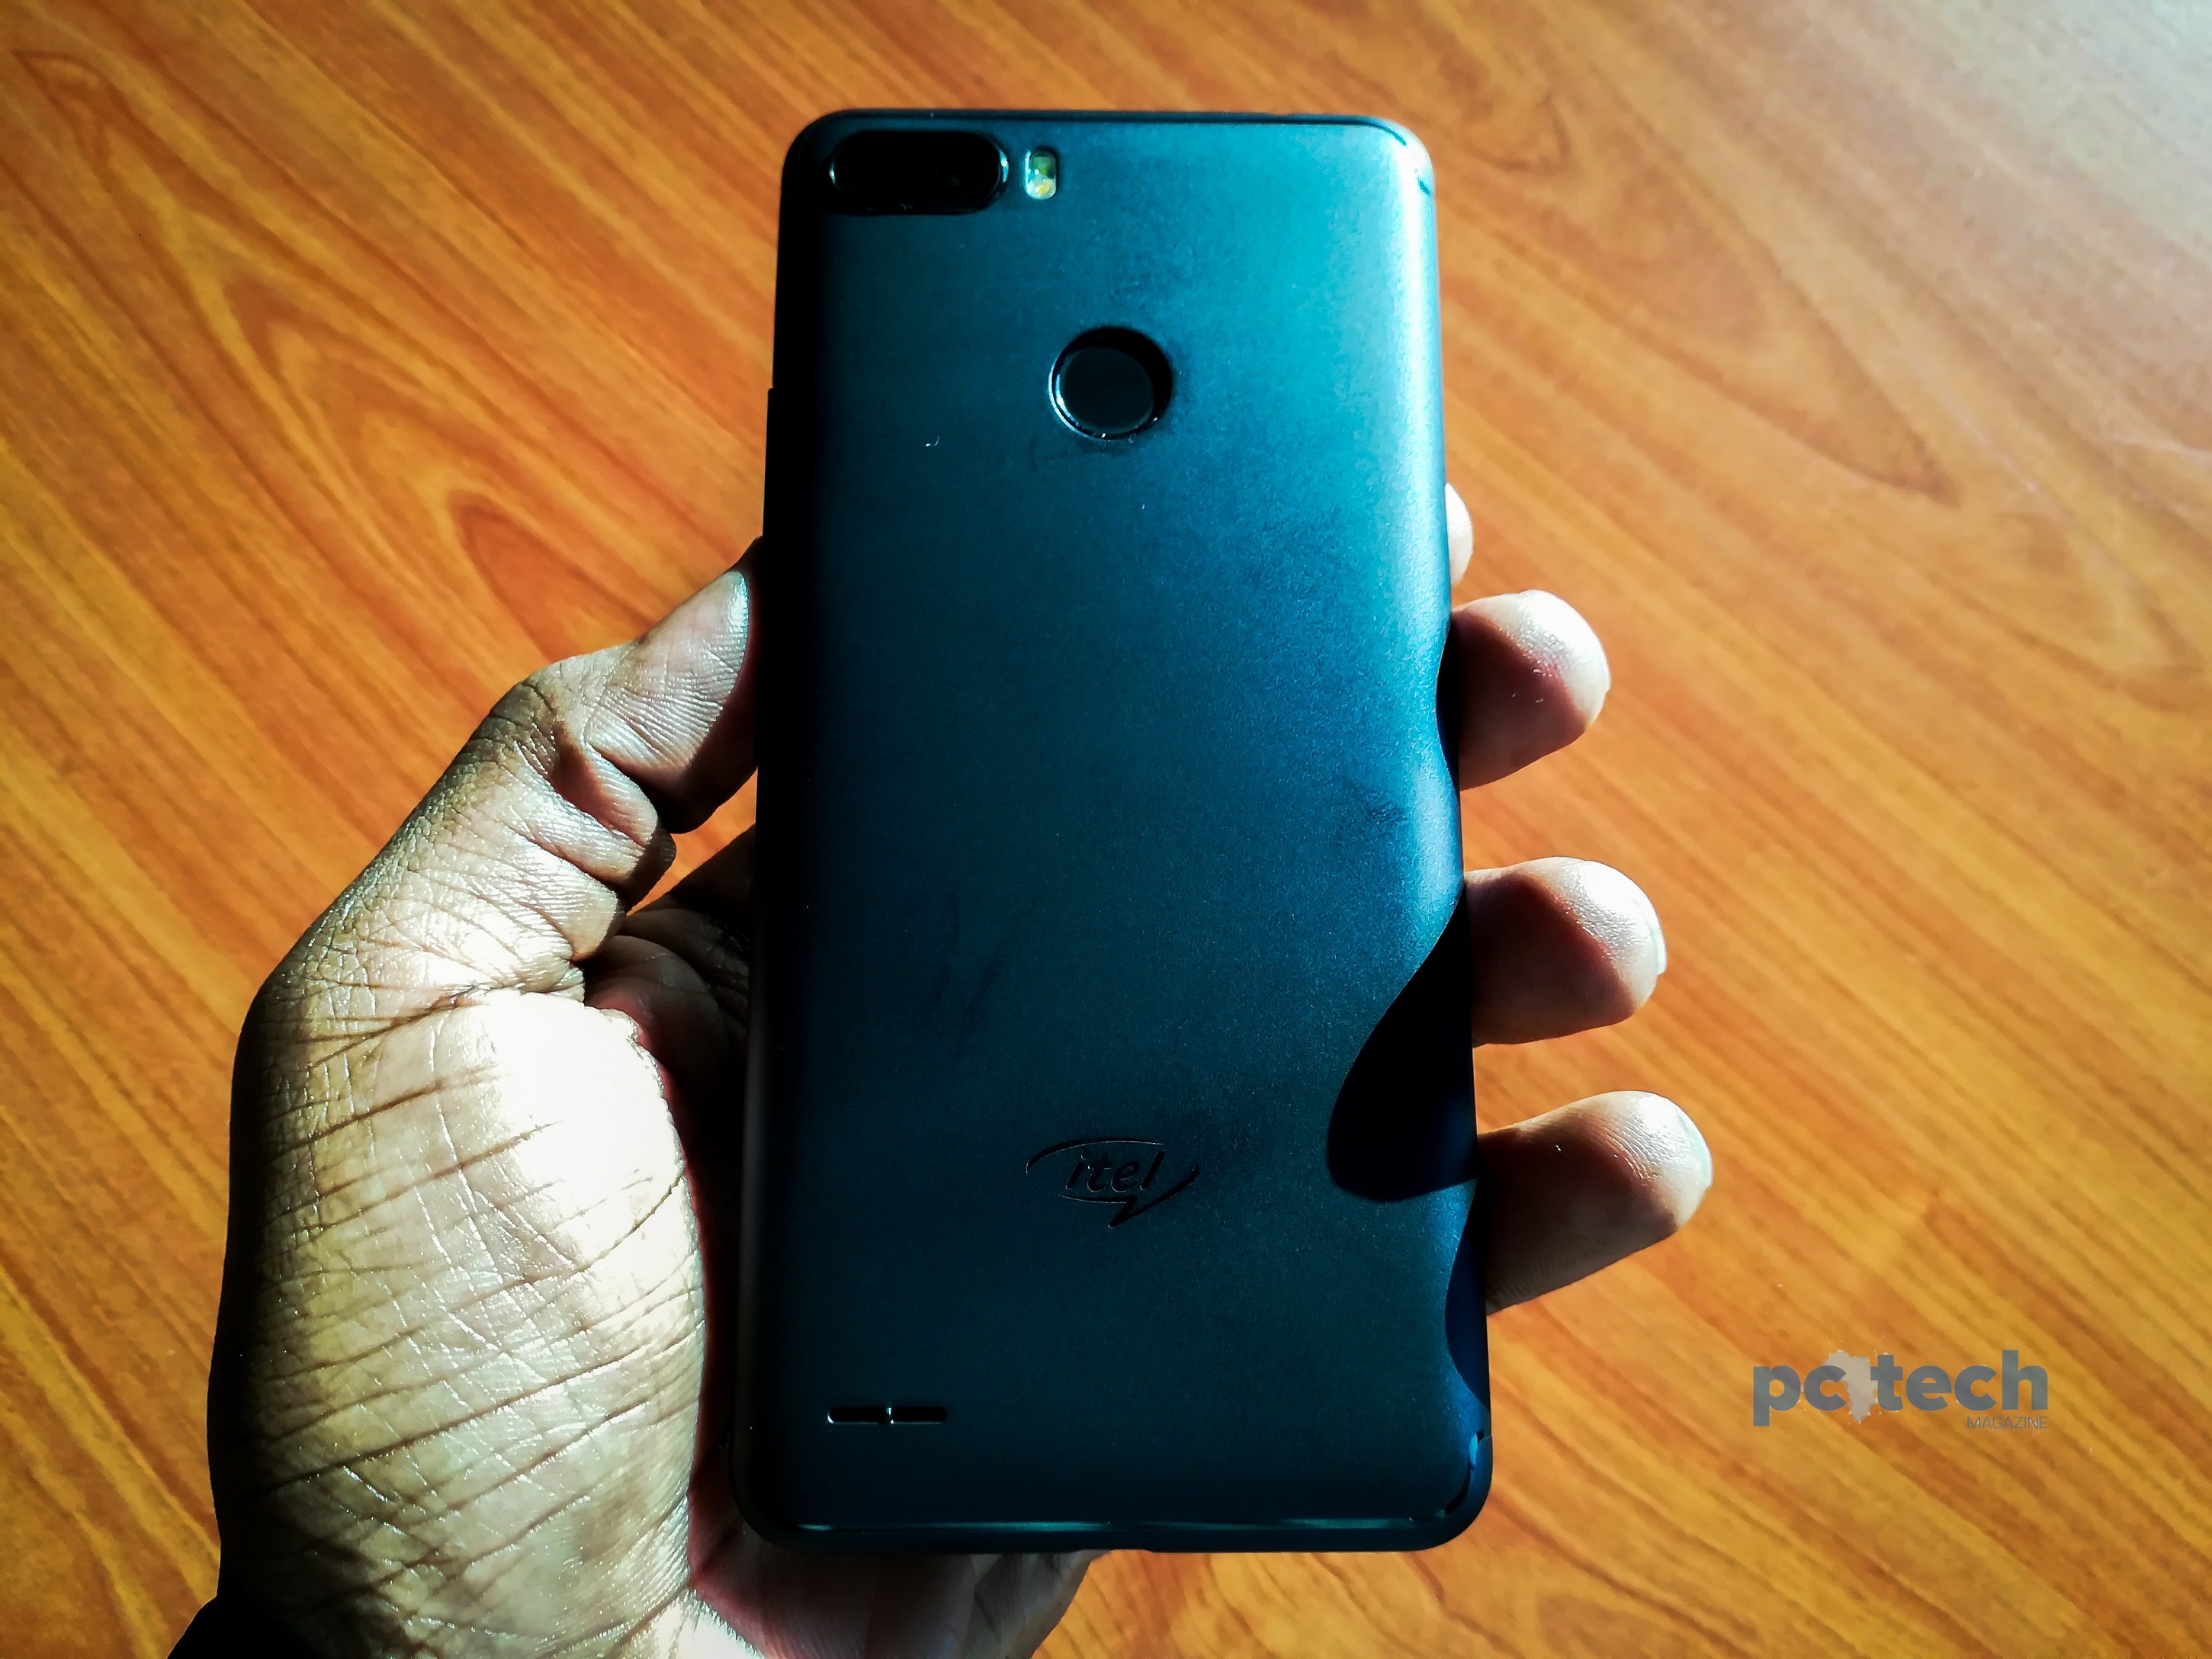 The itel P32 was unveiled early of August, and is priced between UGX330,000 to UGX350,000 in the Ugandan market, available in all itel stores country wide, as well as authorized mobile phone dealers.